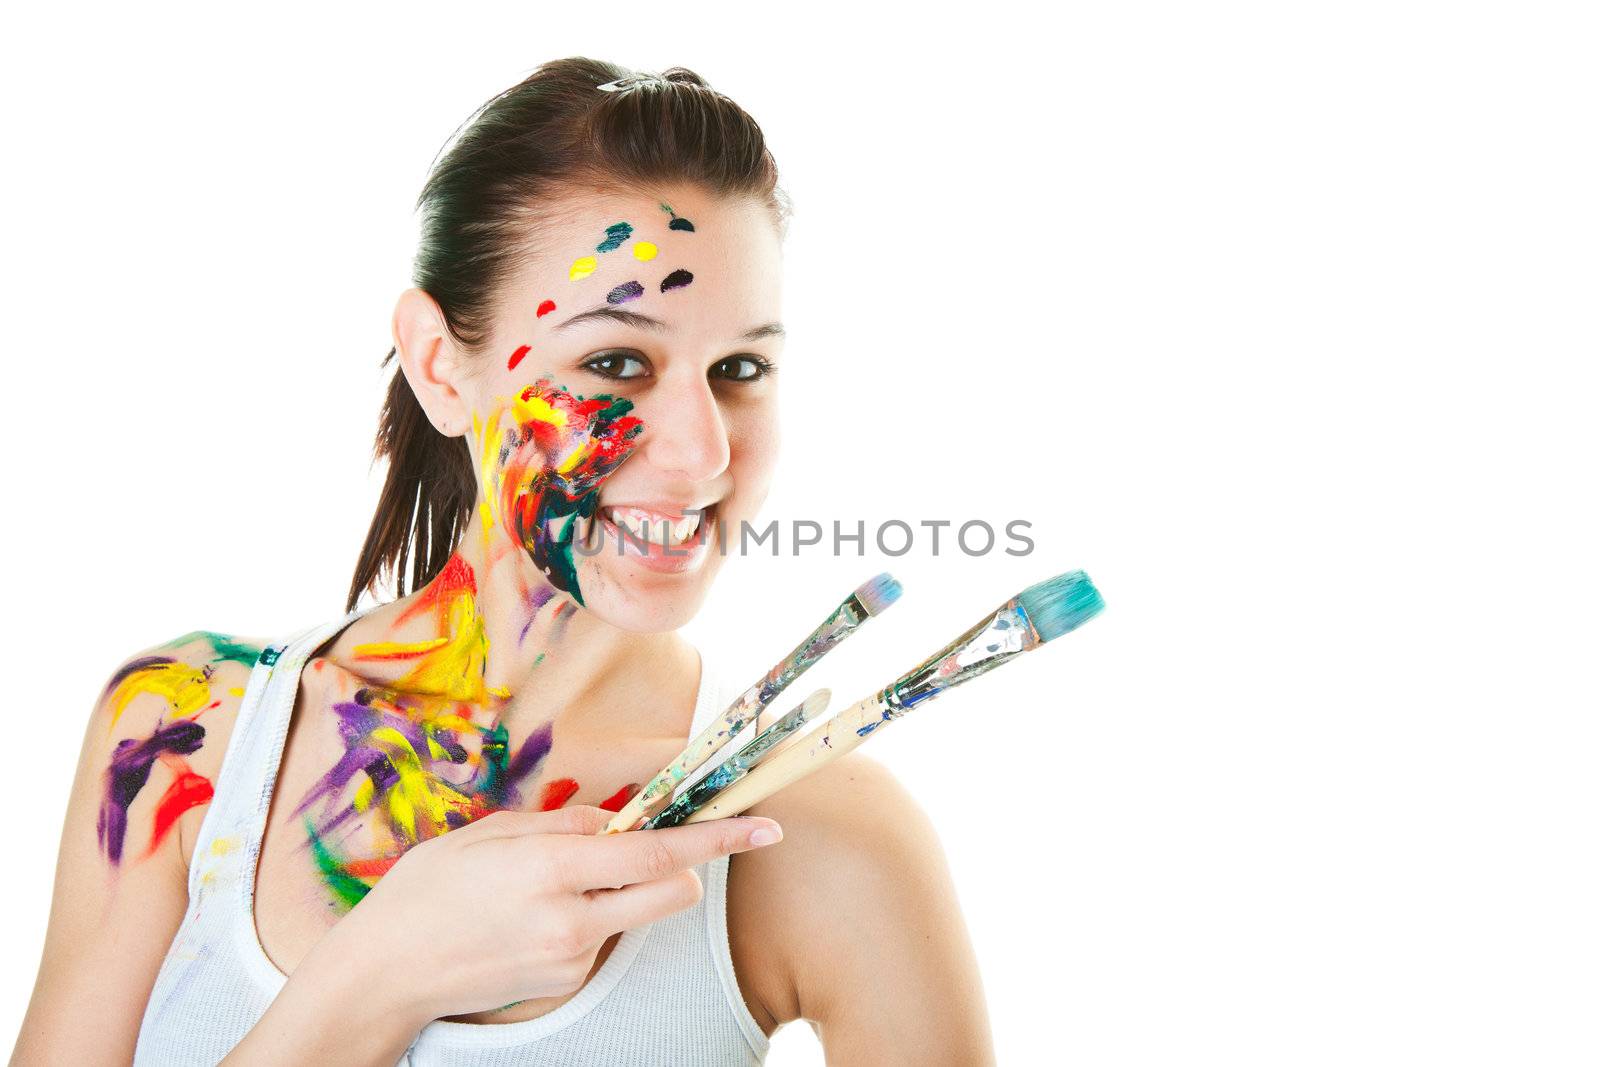 A young, smiling artist with brushes and acrylic paint on her face and body.  Shot on white background.